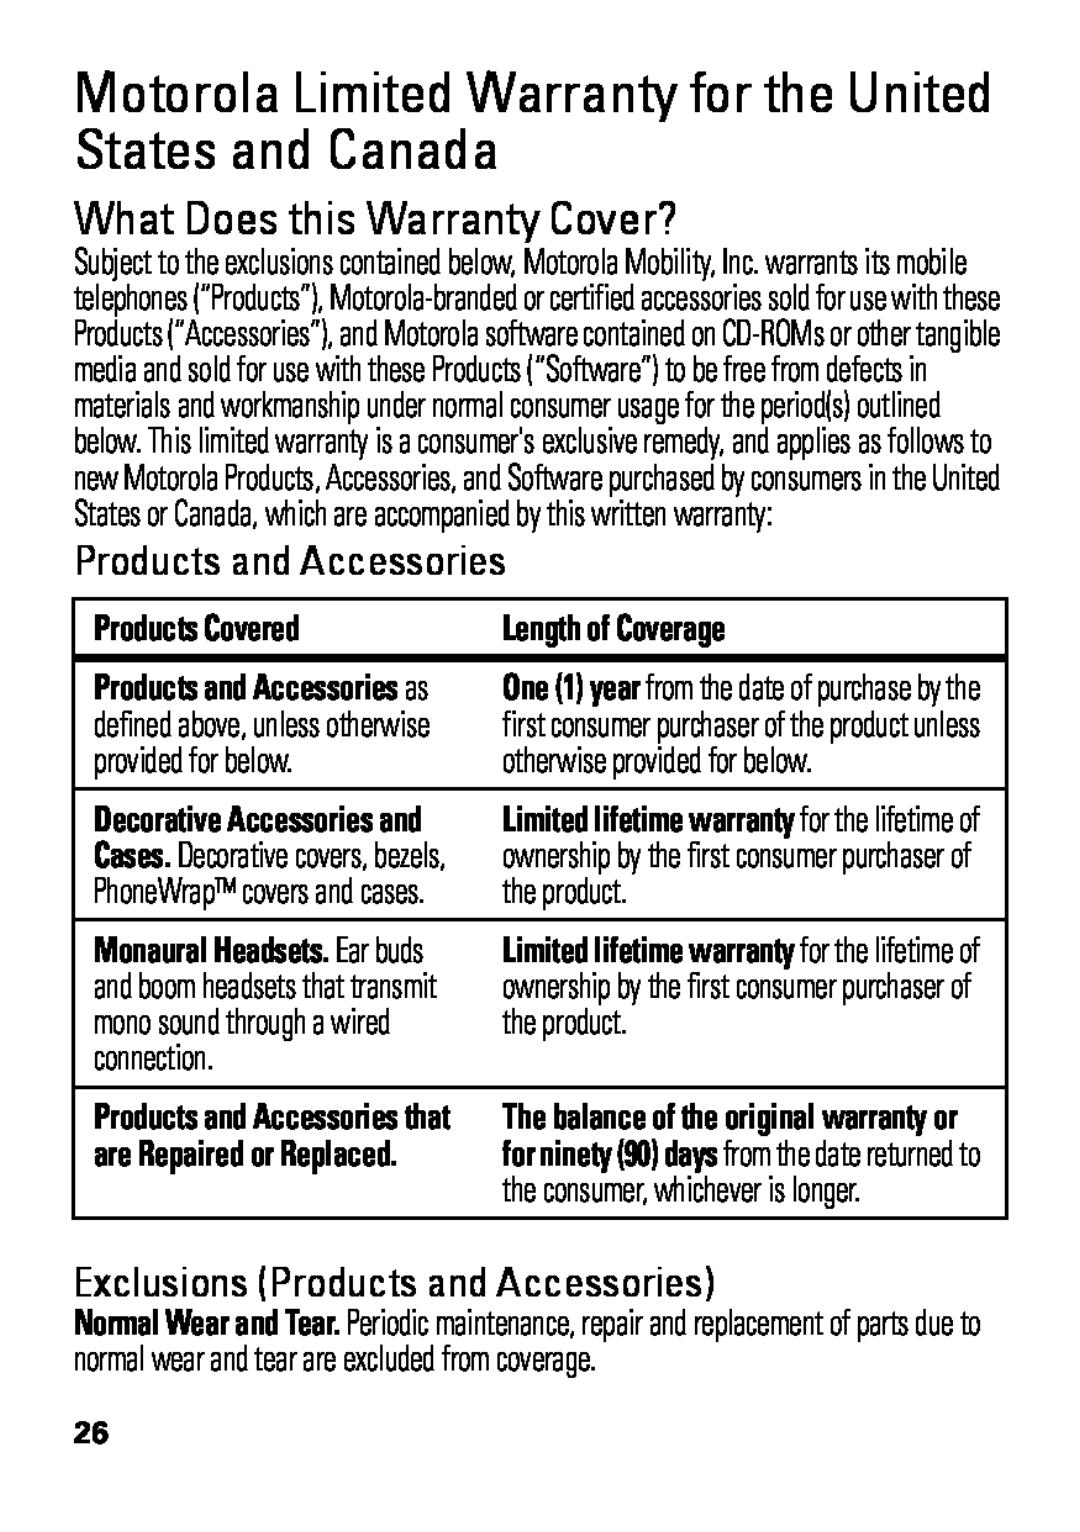 Motorola HX550 manual What Does this Warranty Cover?, Products Covered, Length of Coverage, provided for below, the product 